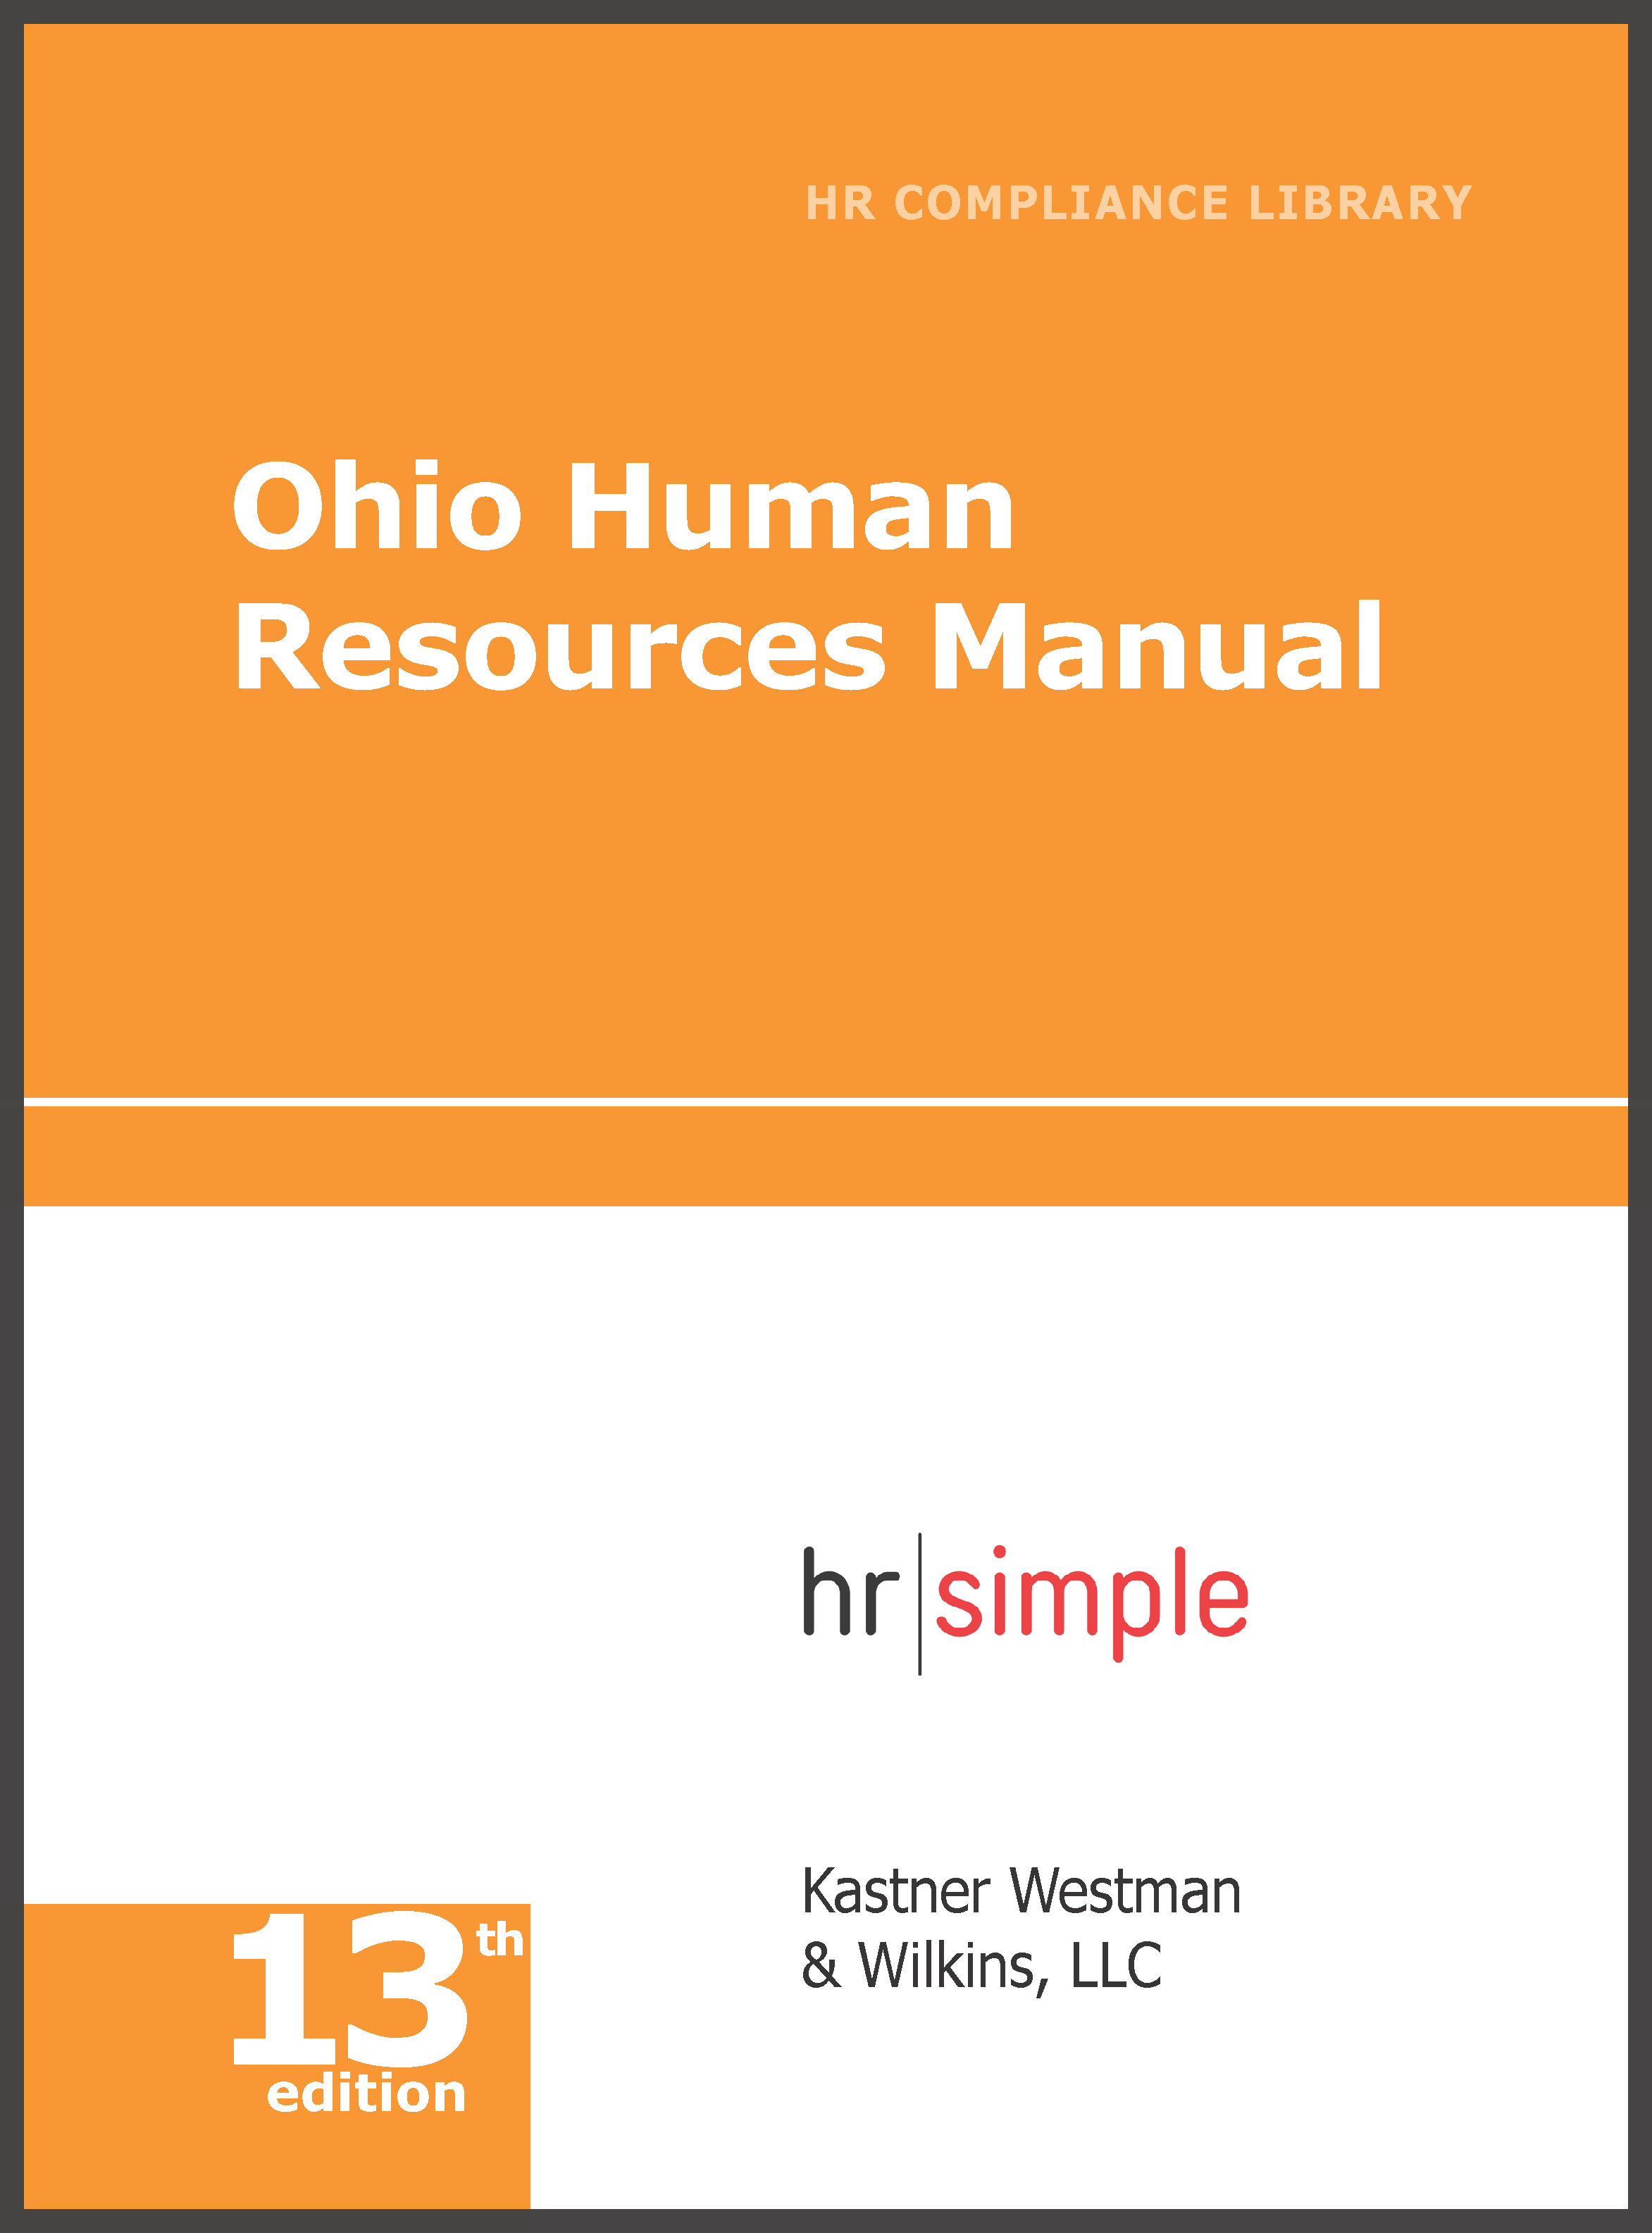 Ohio Human Resources Library—Online Only employment law image, remote work, labor laws, employment laws, right to work, order of protection, minimum wage